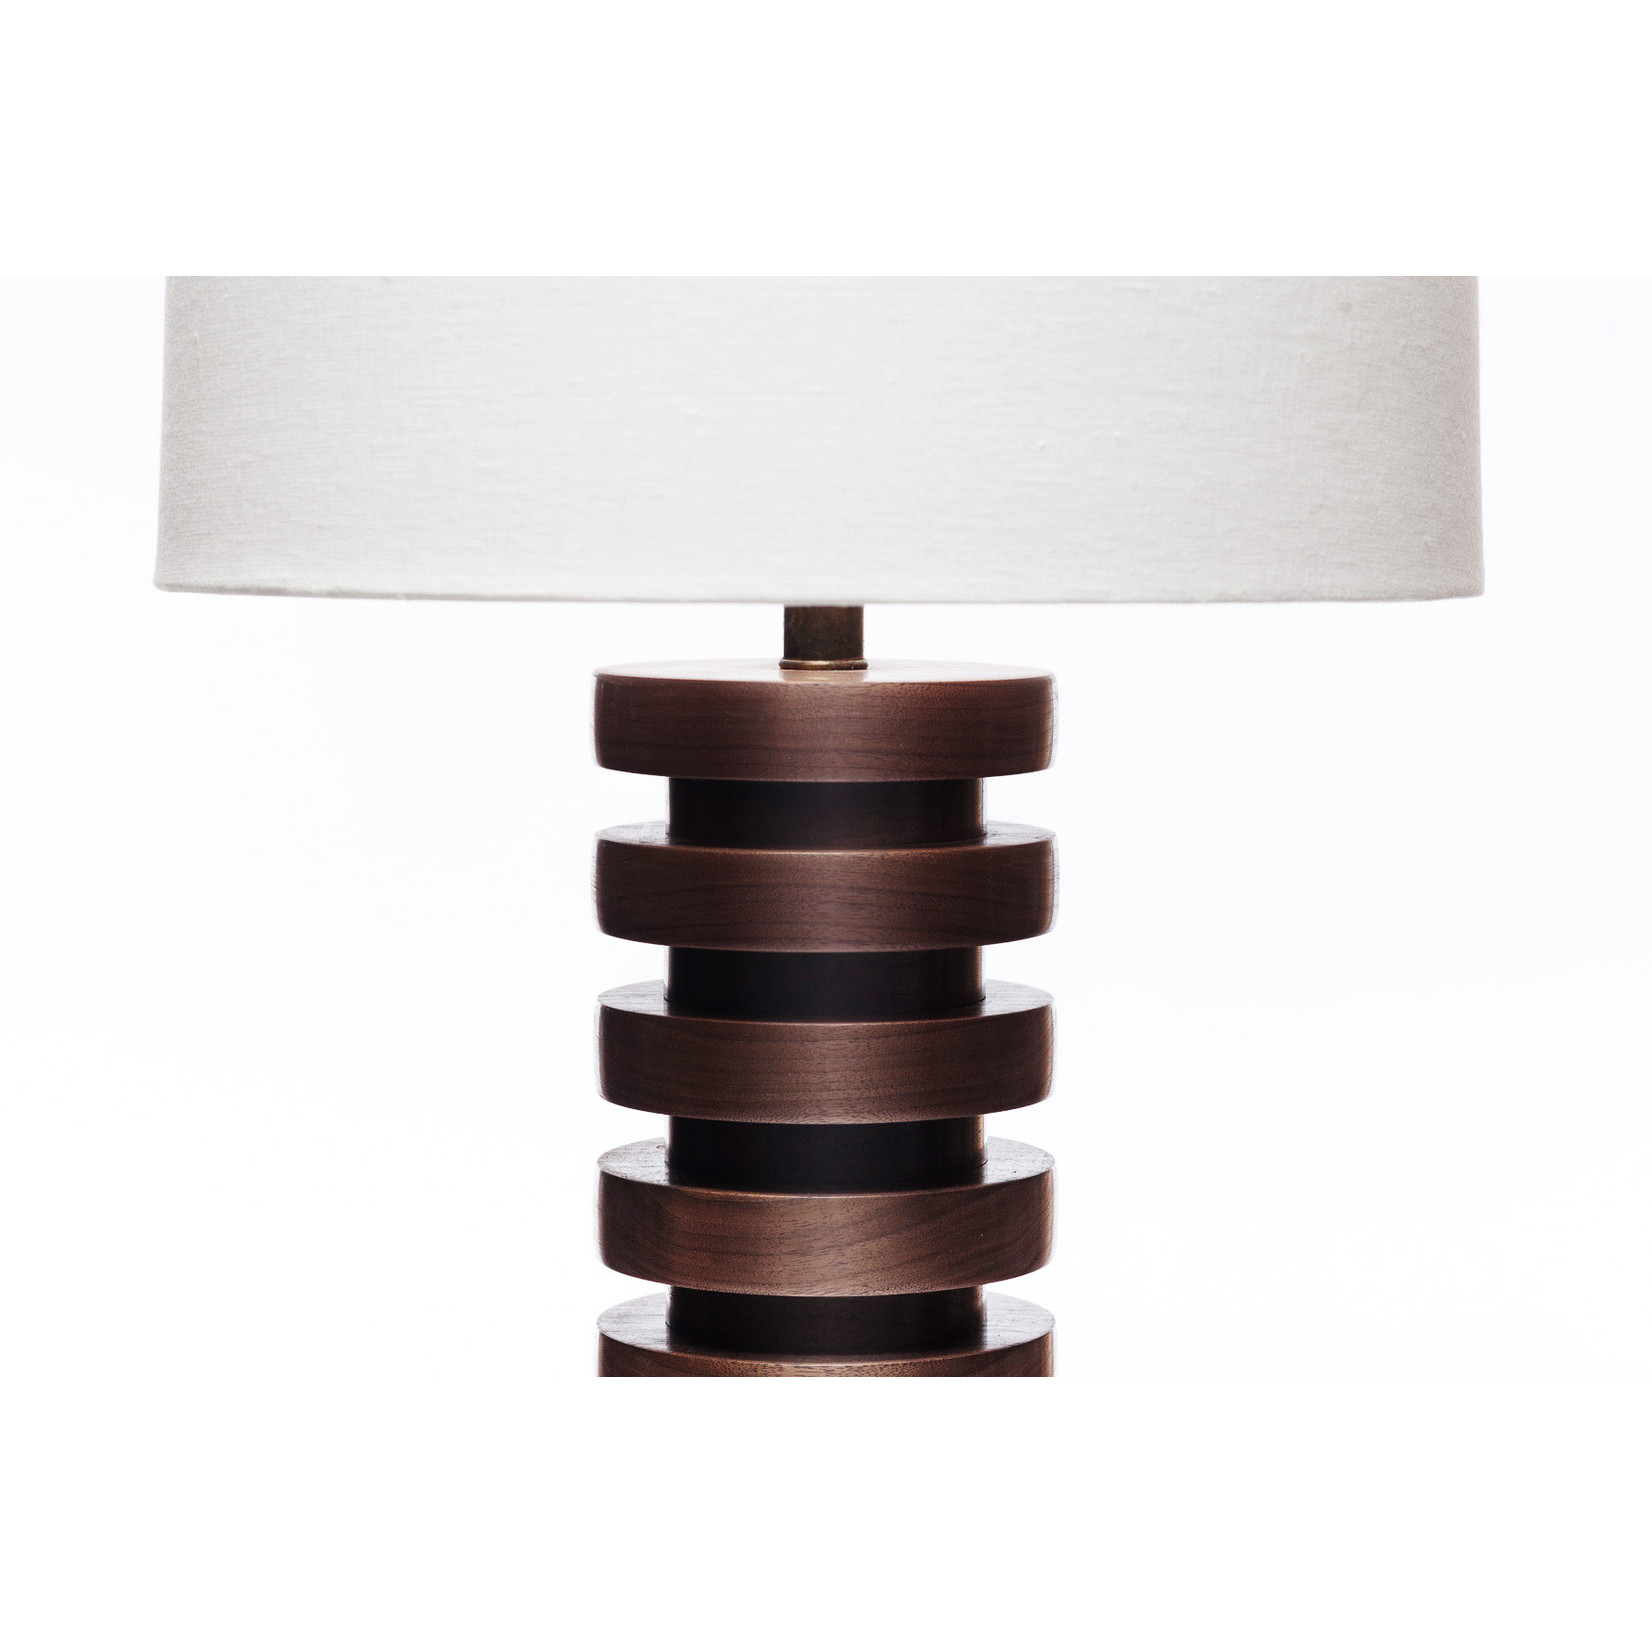 Lawrence & Scott by weve Malmo Table Lamp (Walnut)